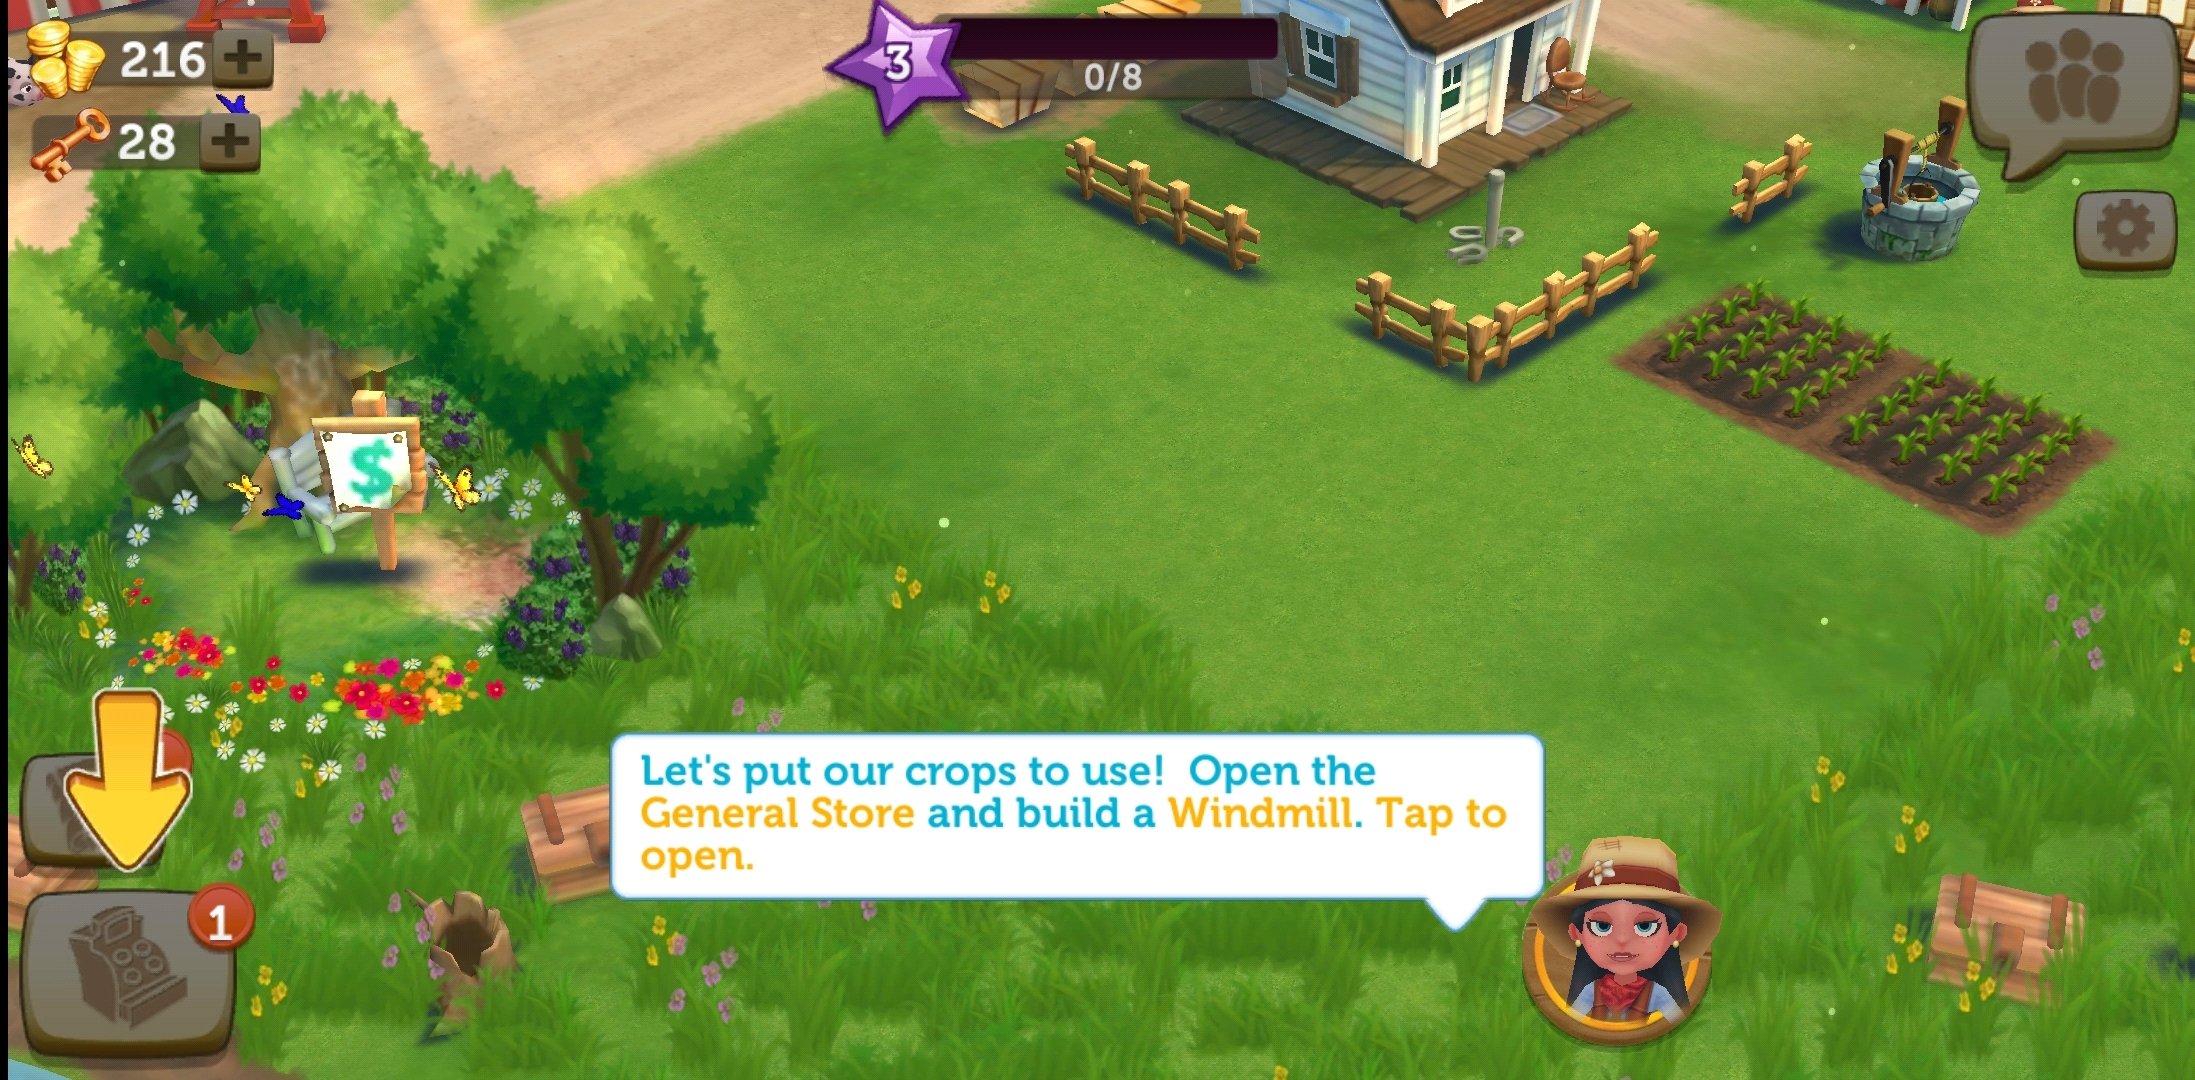 farmville 2 country escape best farm hand for finding blackberries